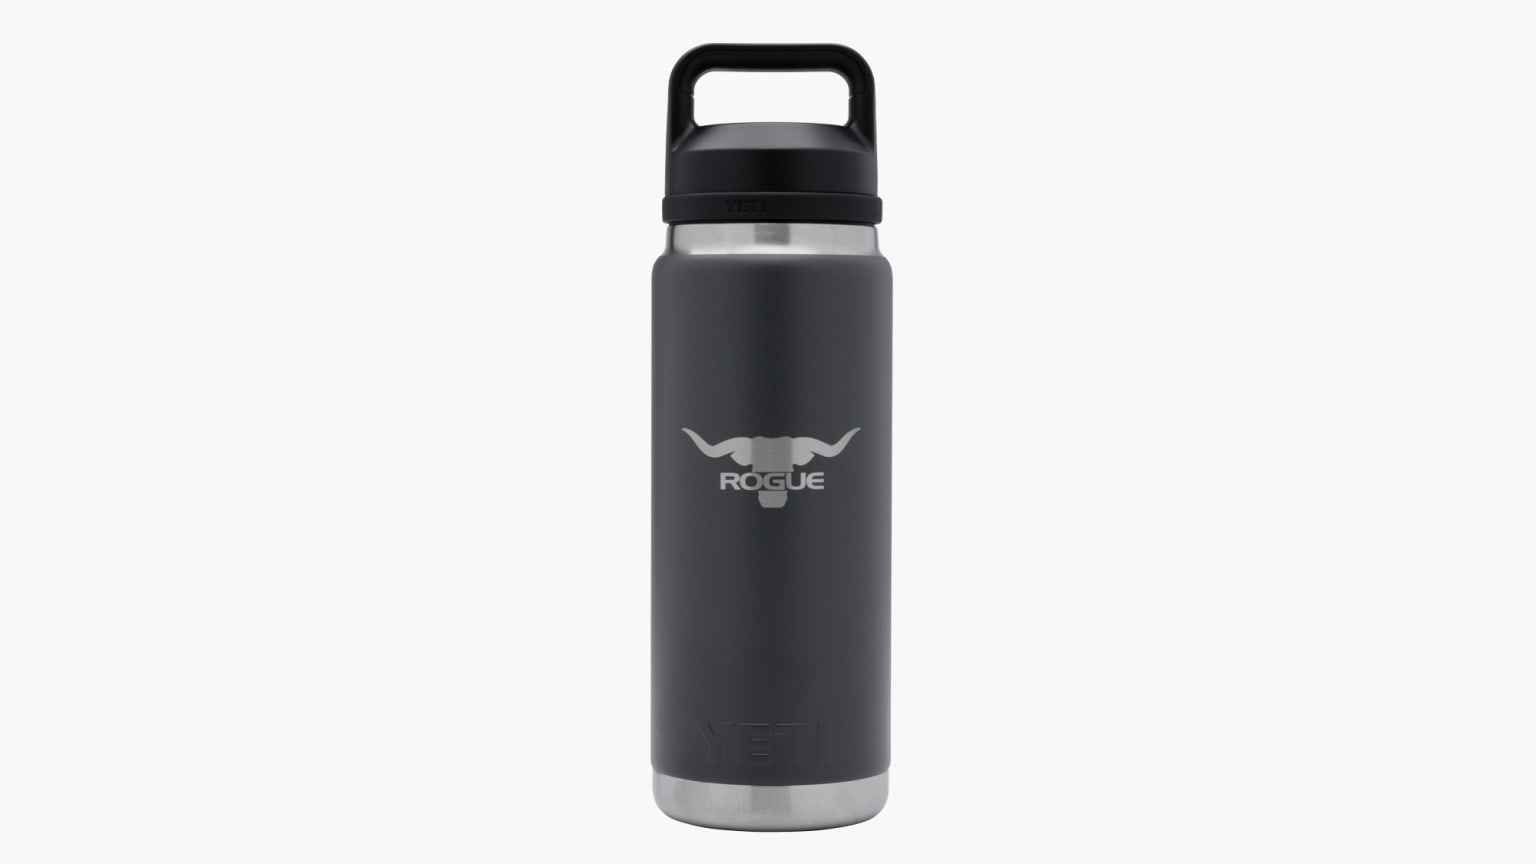 https://assets.roguefitness.com/f_auto,q_auto,c_limit,w_1536,b_rgb:f8f8f8/catalog/Gear%20and%20Accessories/Accessories/Shakers%20and%20Bottles/YT0105/YT0105-H_qv0ge4.png